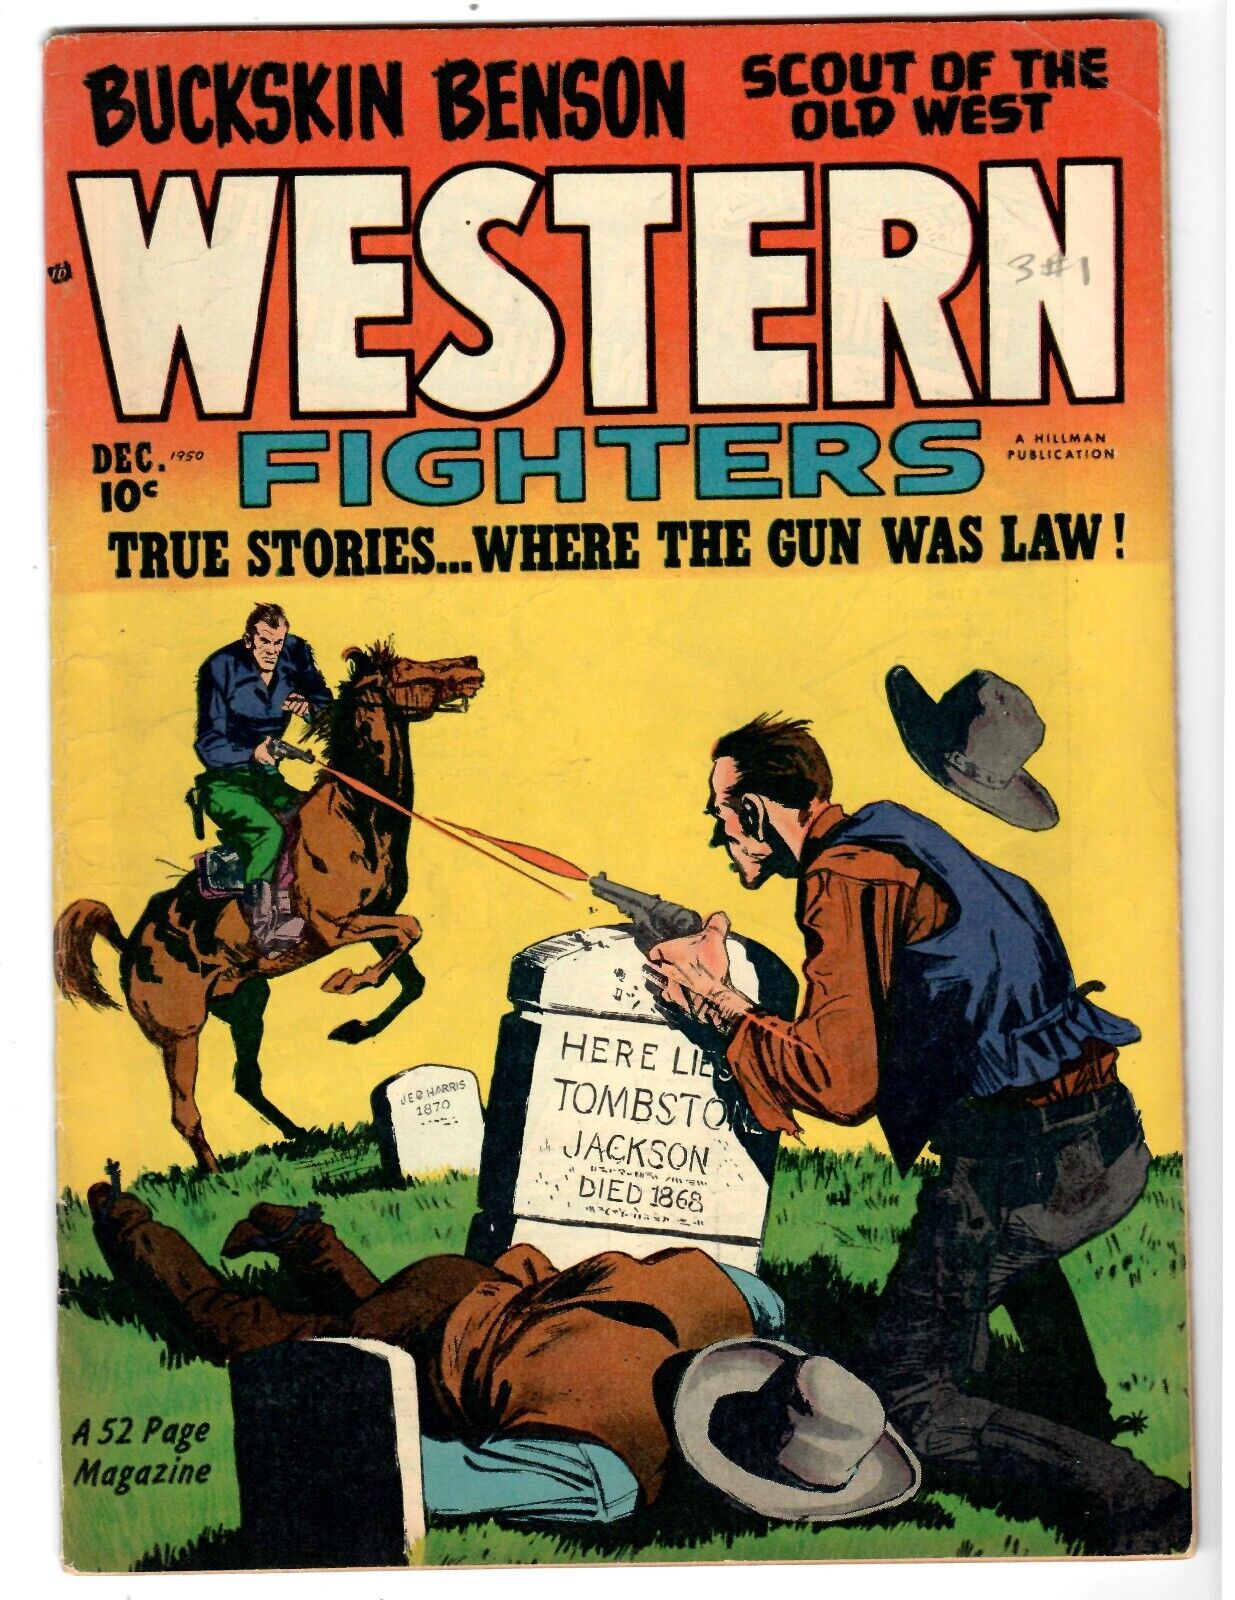 Western Fighters Vol. 3 #1 (1950) Hillman Periodicals Very Good